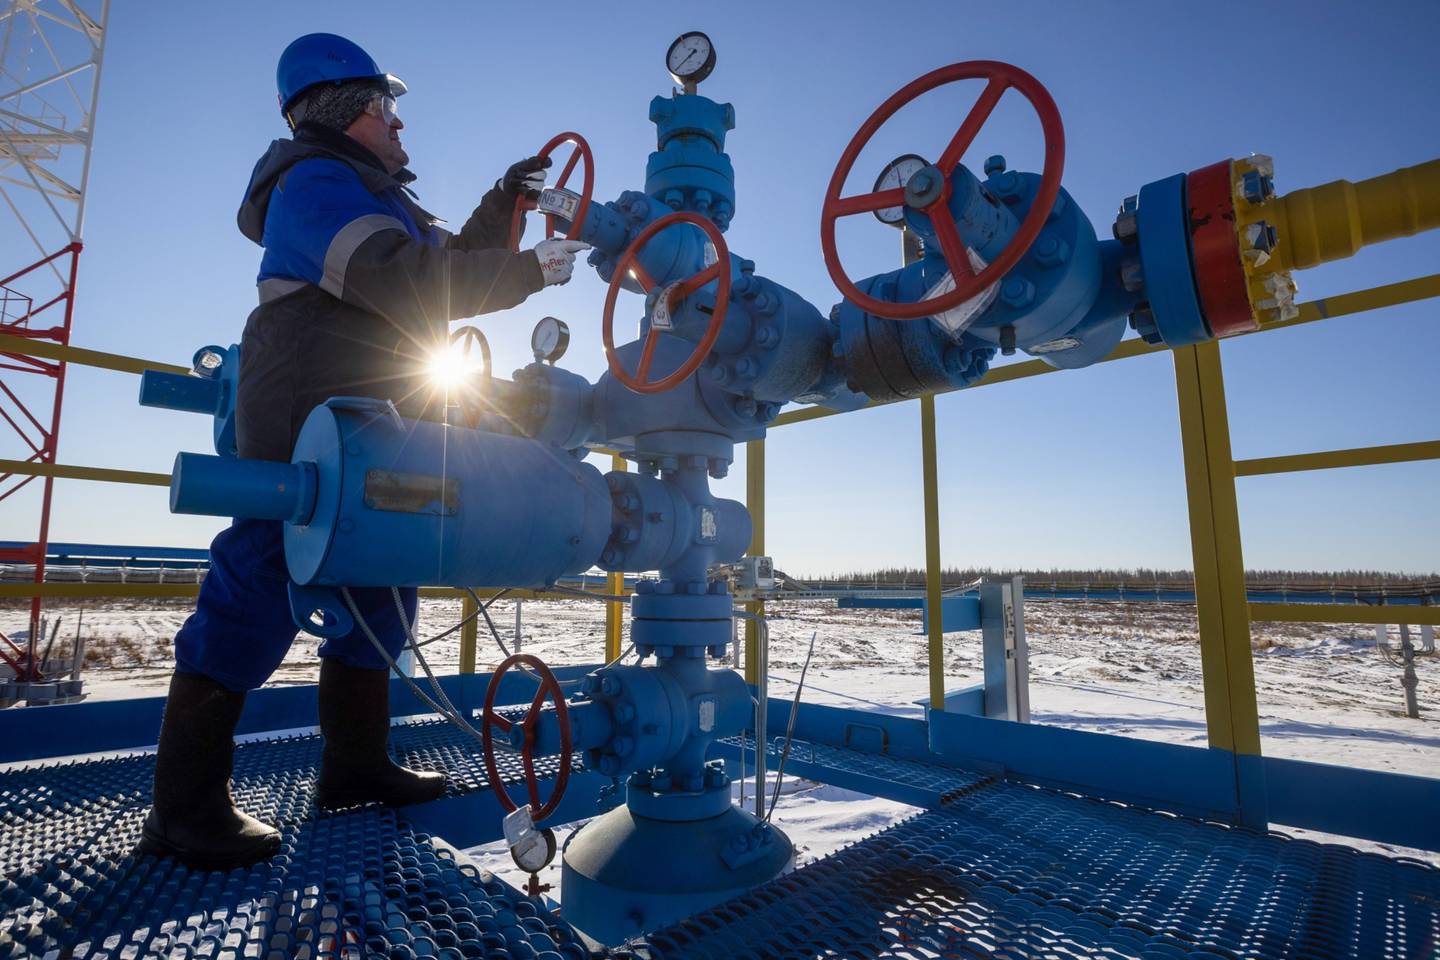 A worker turns a valve wheel at a gas well on the Gazprom PJSC Chayandinskoye oil, gas and condensate field in the Lensk district of the Sakha Republic, Russia. Source: Andrey Rudakov/Bloomberg